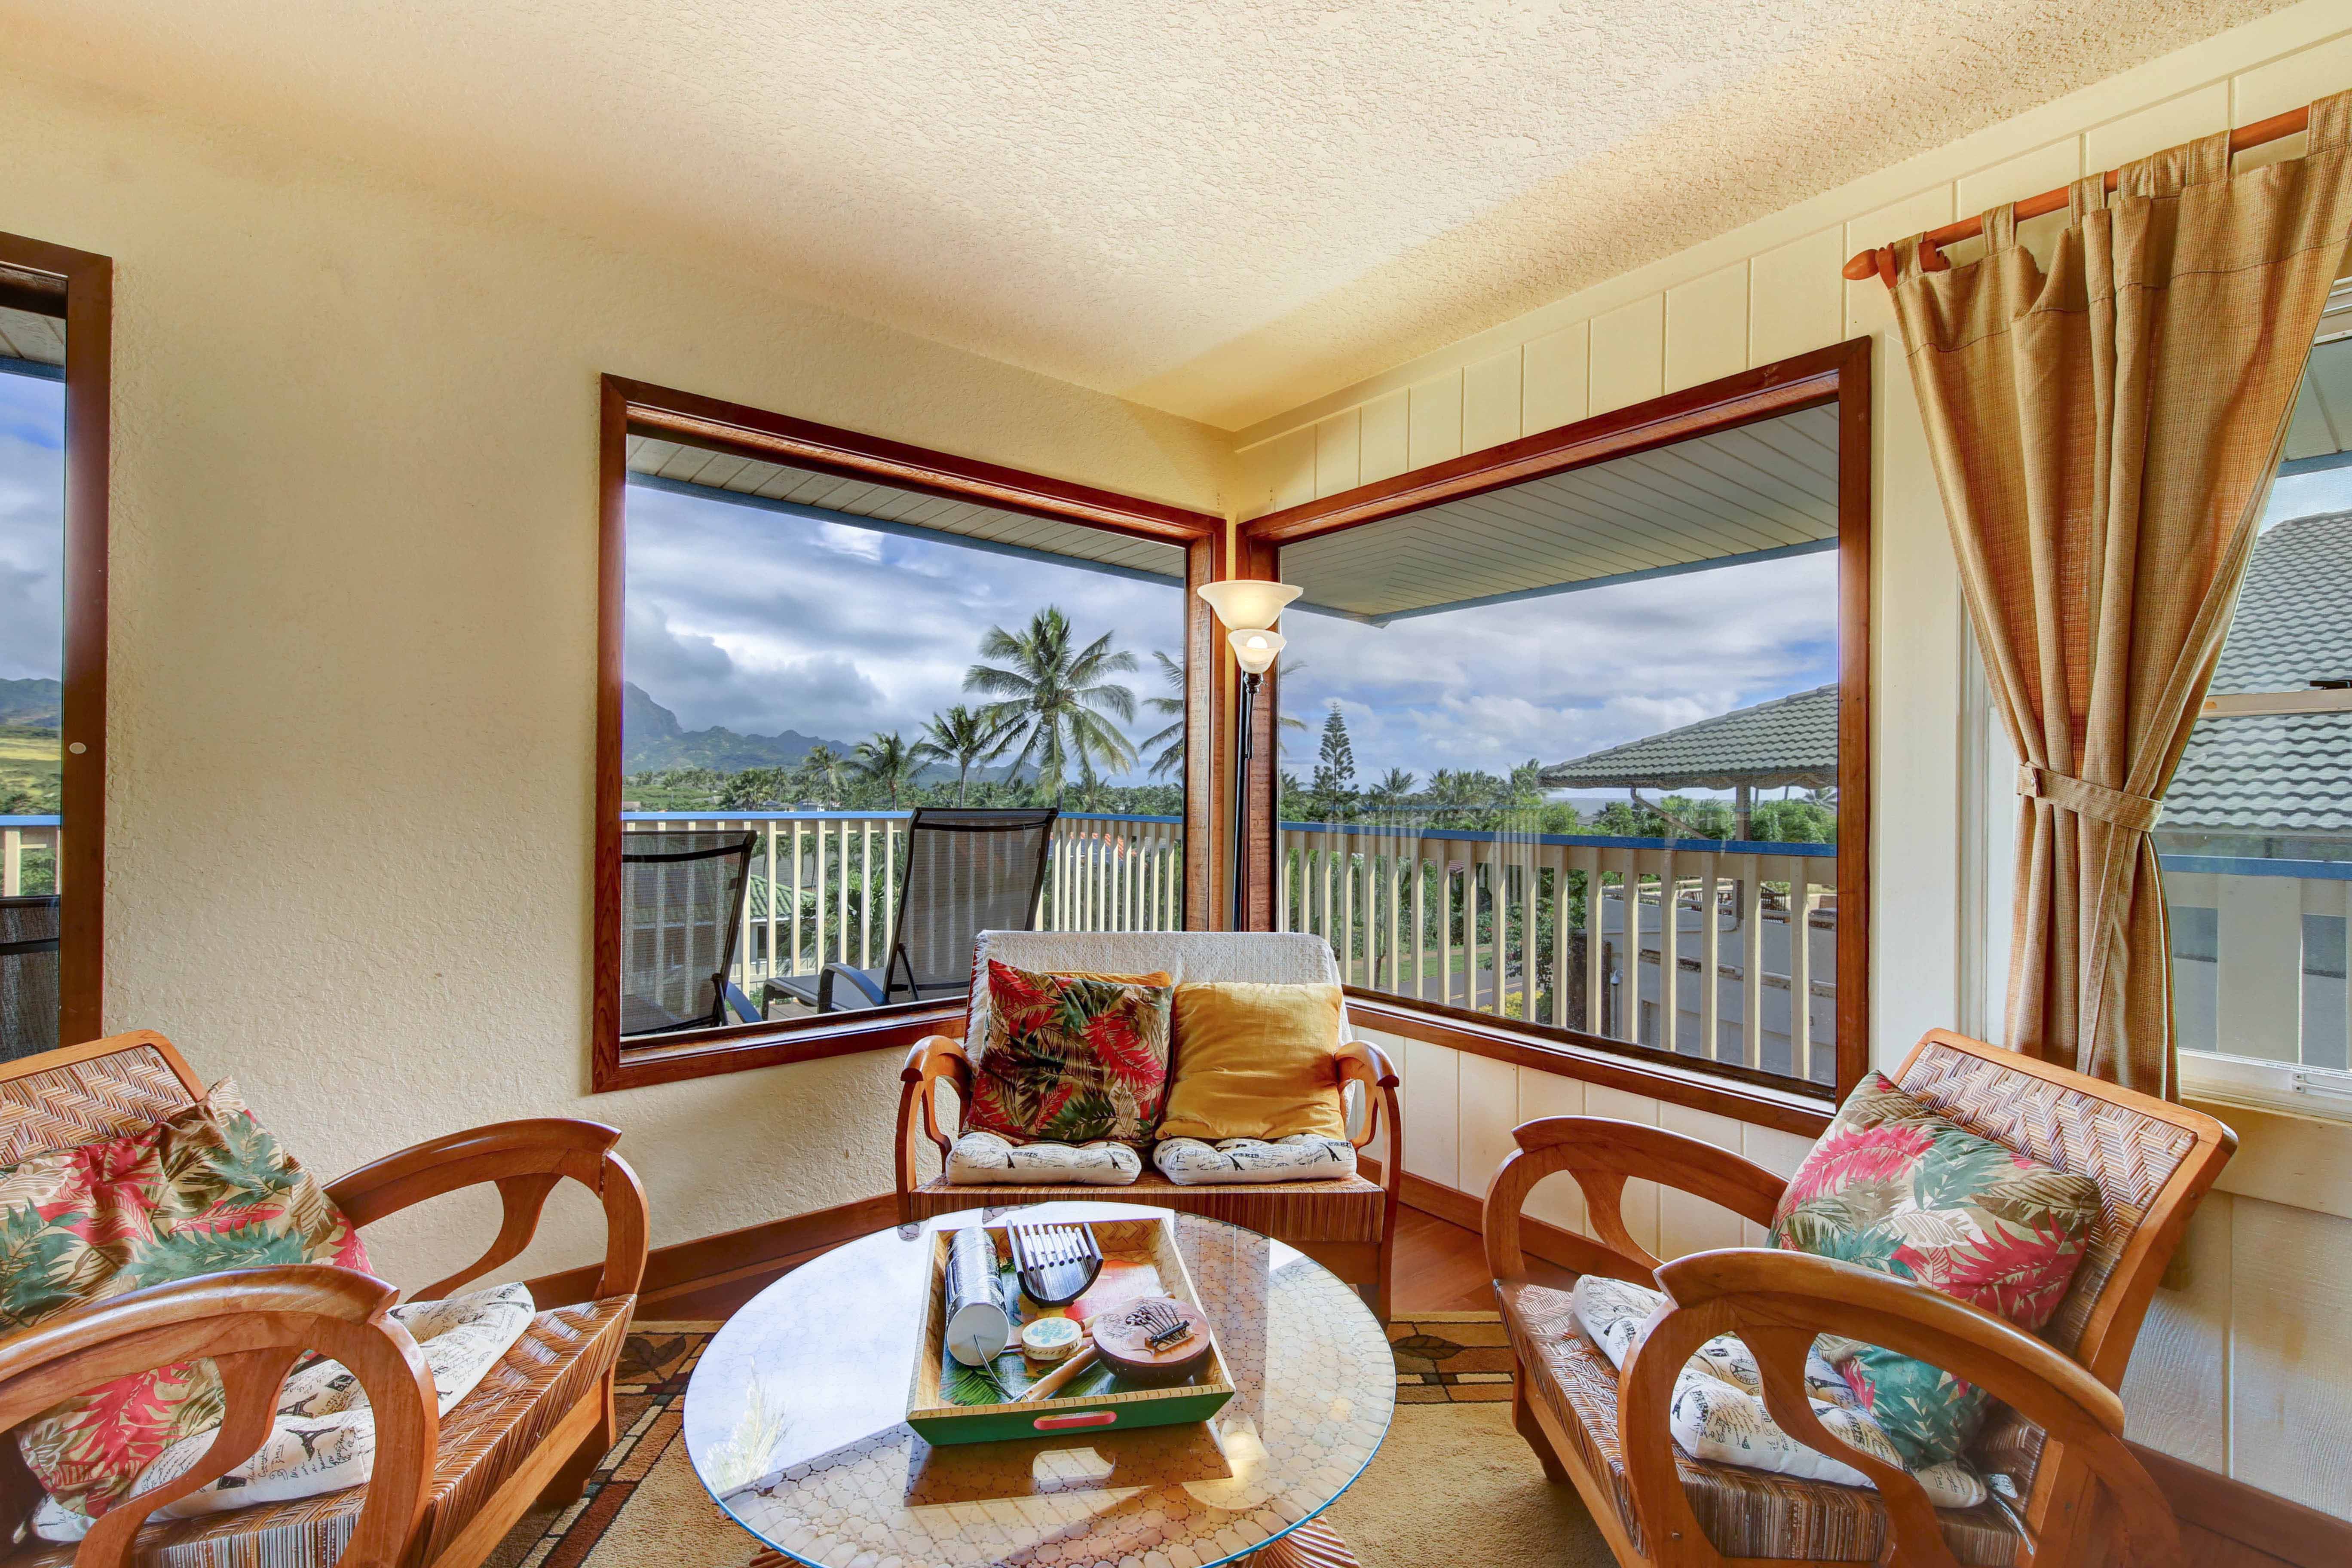 See Haupu mountain, partial golf course, Ocean views from living room of our kauai vacation rental